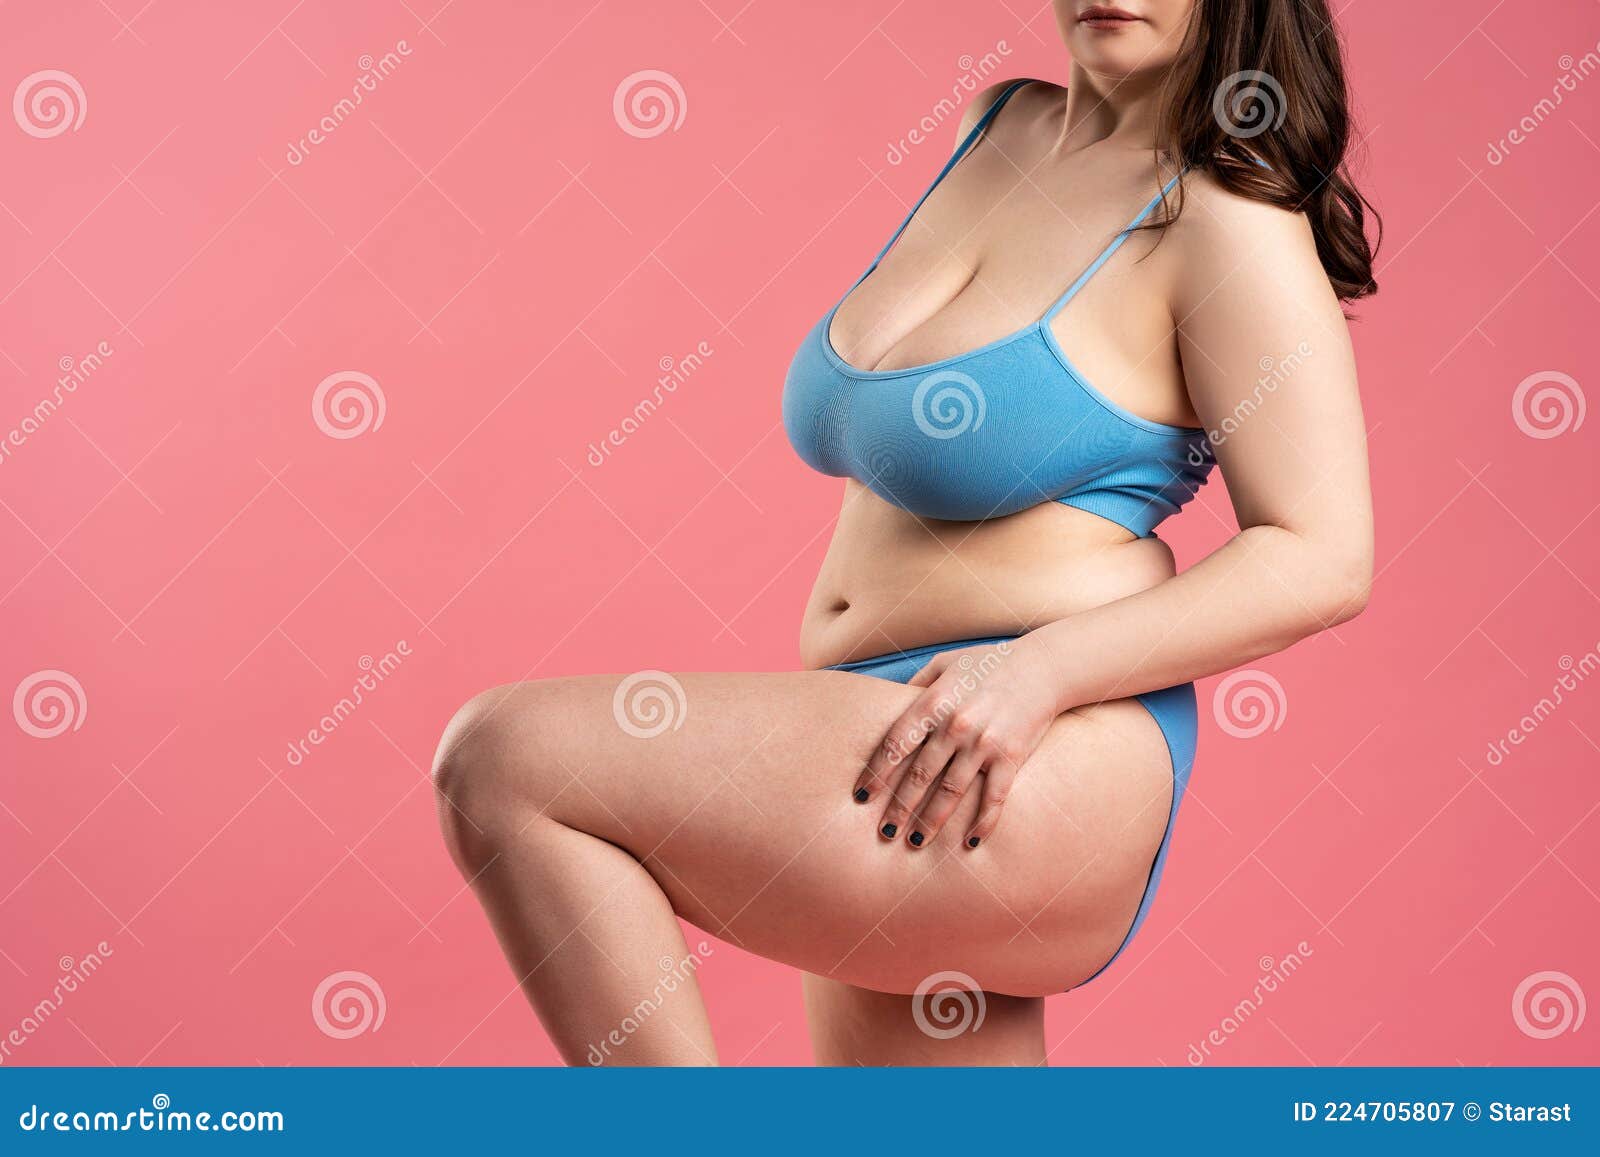 Woman In Blue Top Bra With Very Large Saggy Breasts On Pink